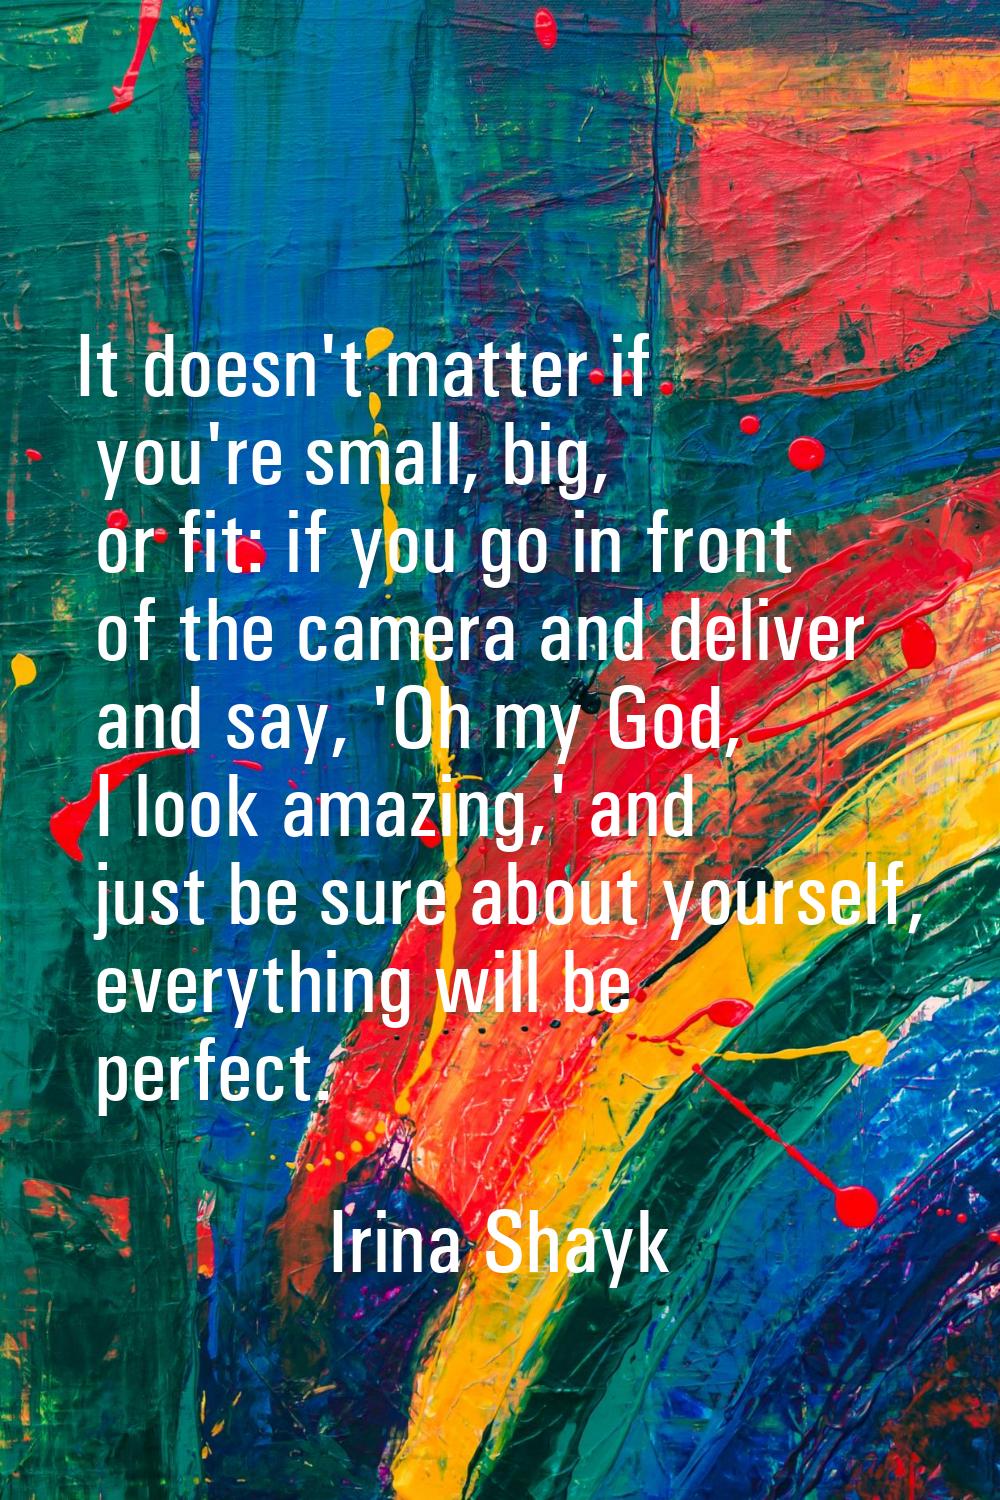 It doesn't matter if you're small, big, or fit: if you go in front of the camera and deliver and sa